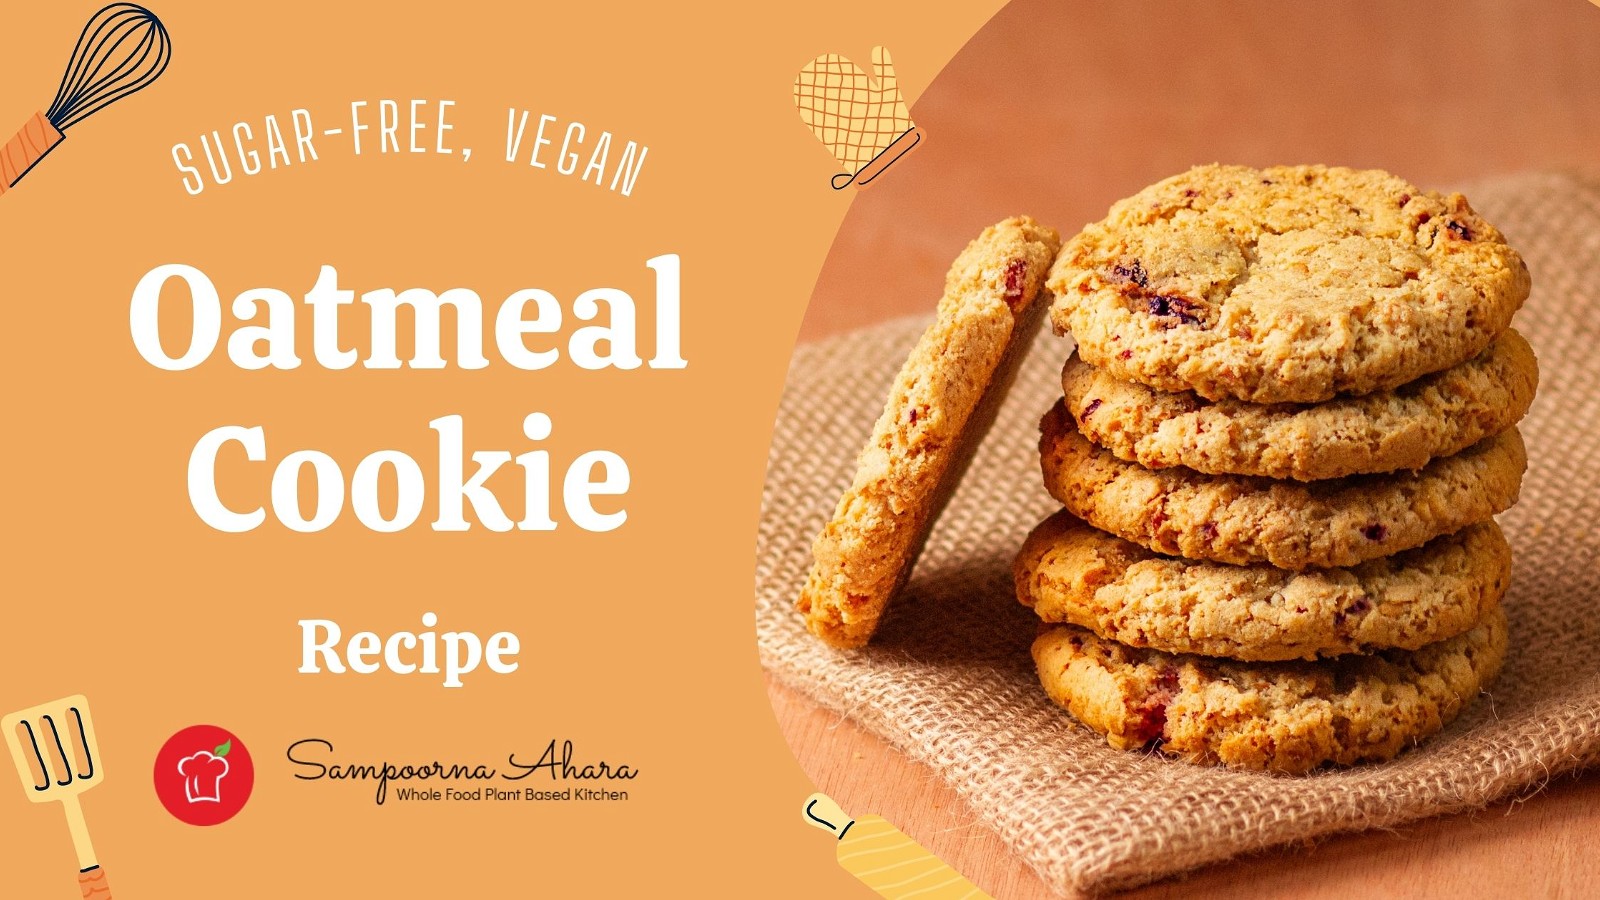 Image of Oatmeal Cookie Recipe